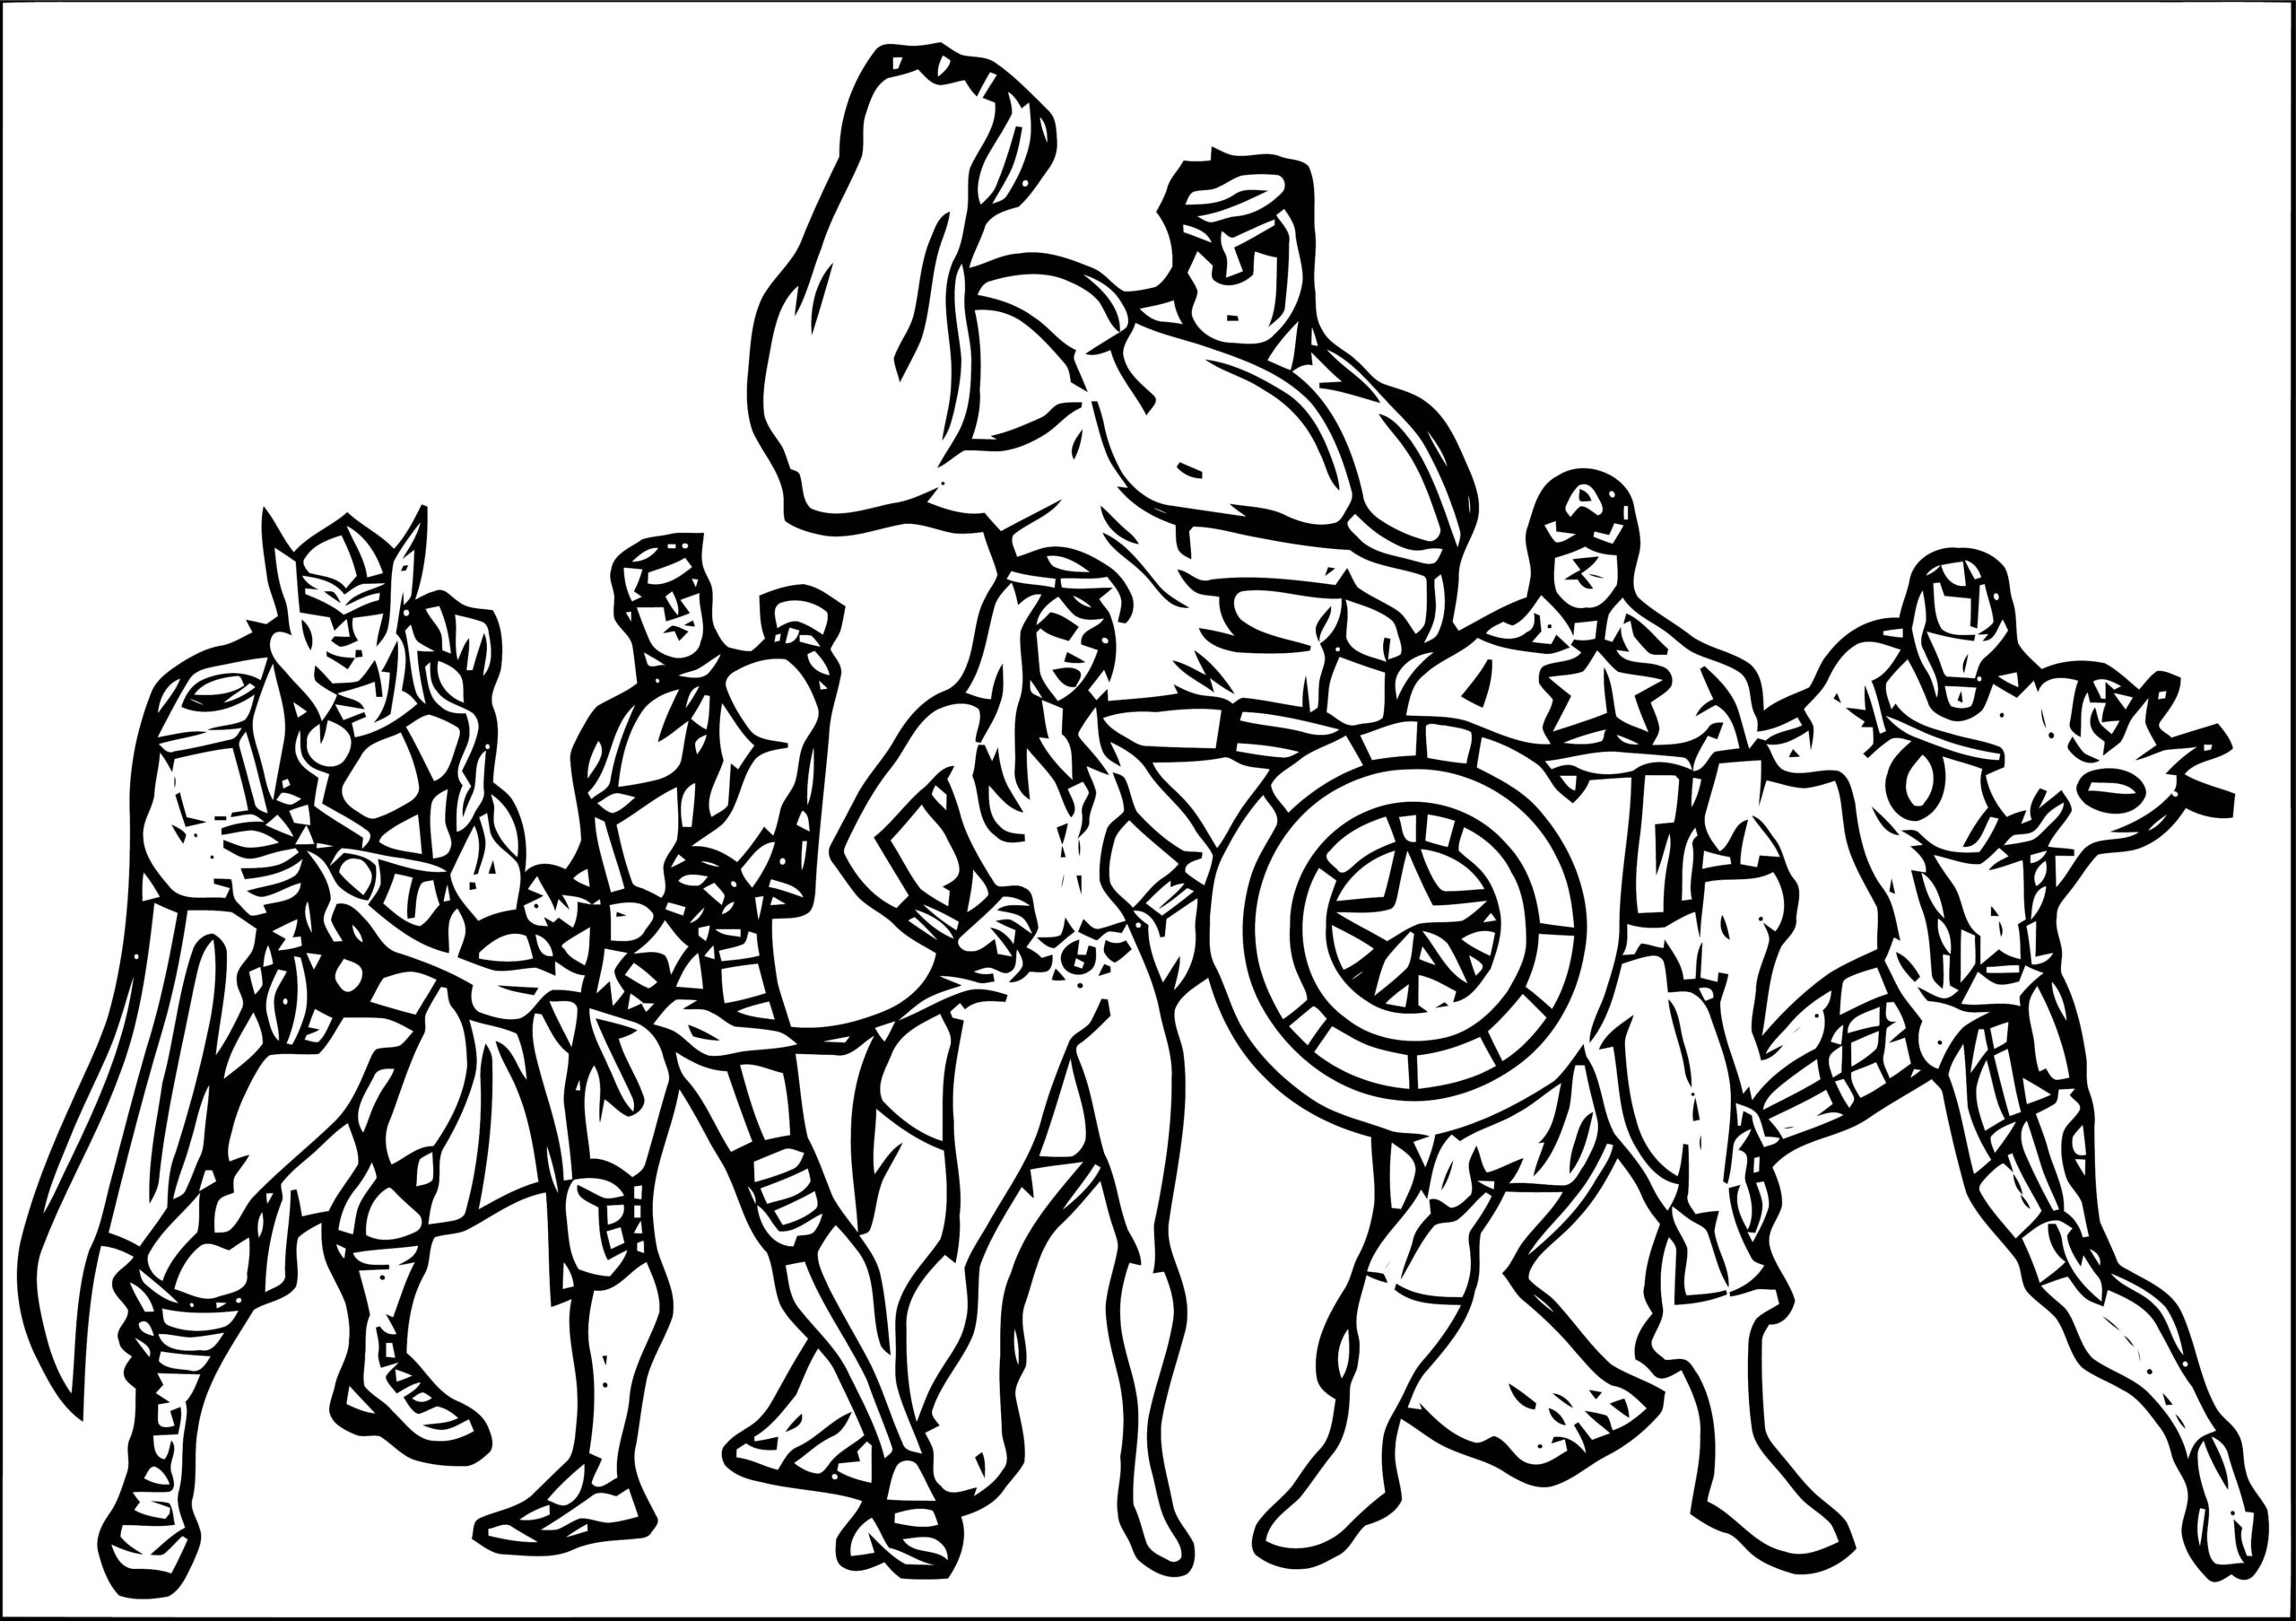 Coloring Book : Star Wars Coloring Pages Free Lego Avengers ...